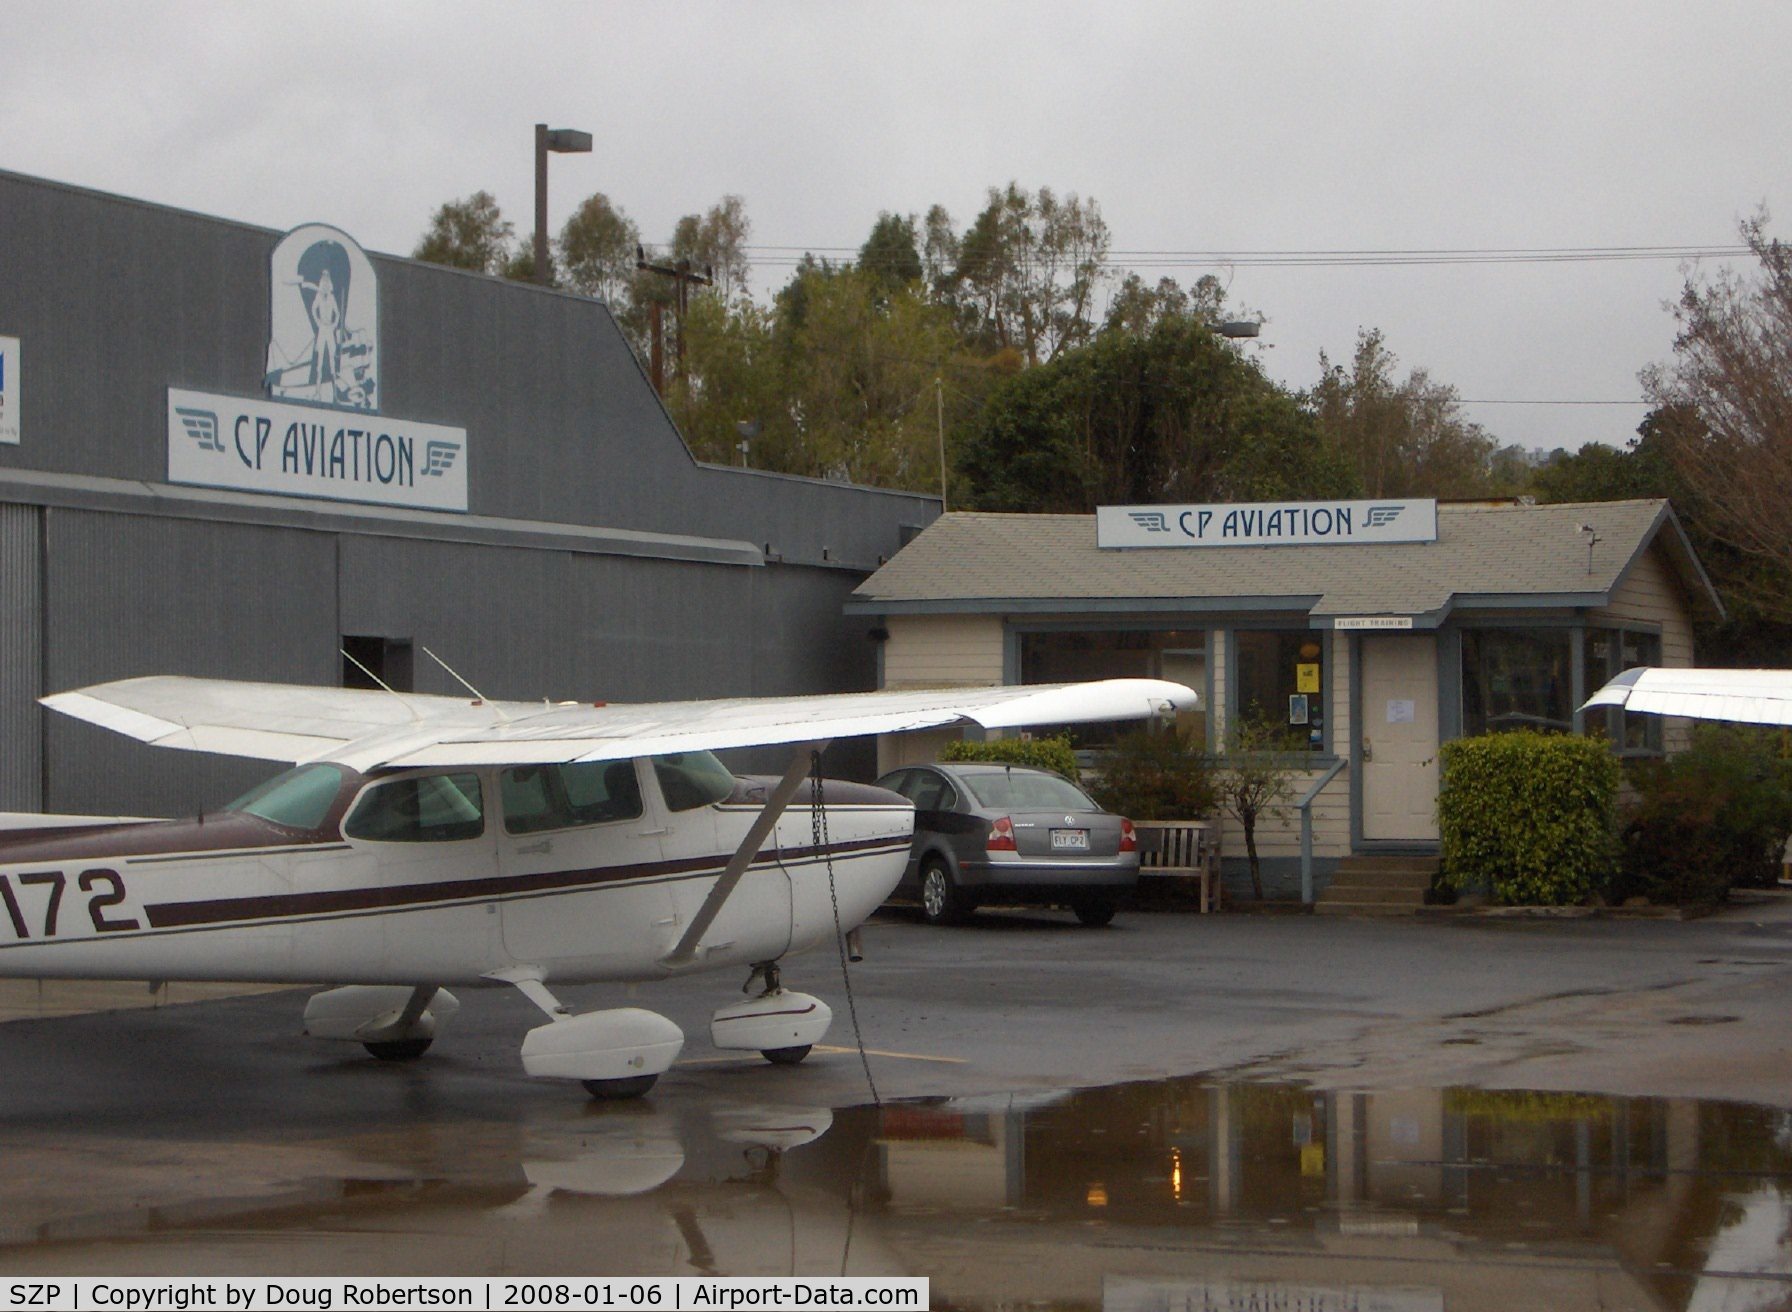 Santa Paula Airport (SZP) - CP Aviation, FBO offering flight instruction and aircraft maintenance. Hangar and Office. Part of CP's extensive flight line of aircraft on a rare, rainy day.